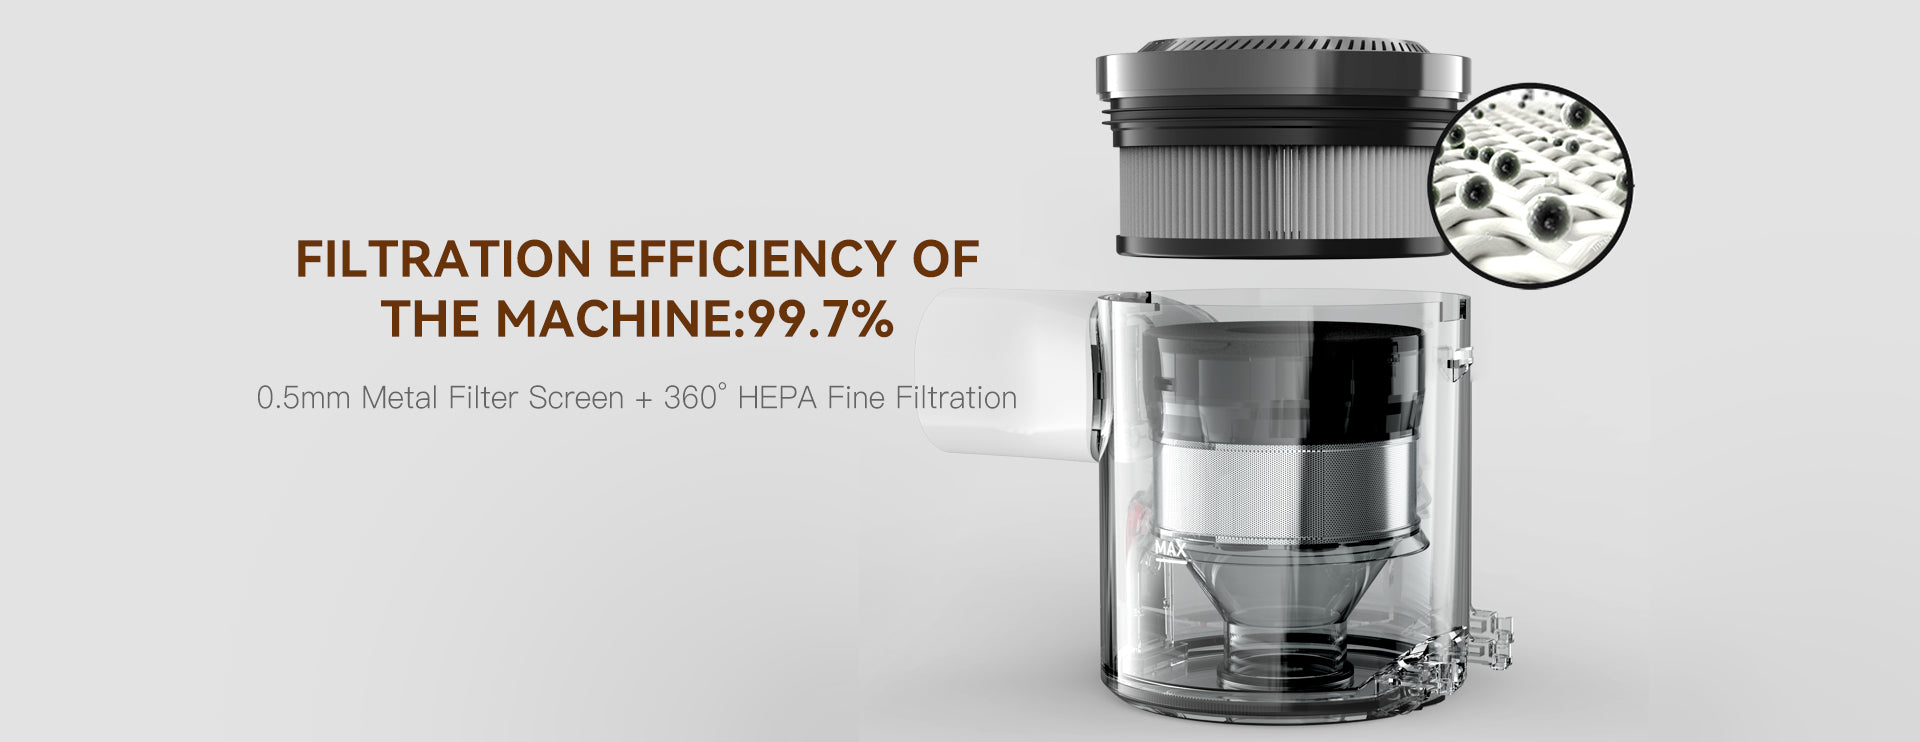 FILTRATION_EFFICIENCY_OFTHE_MACHINE99.7